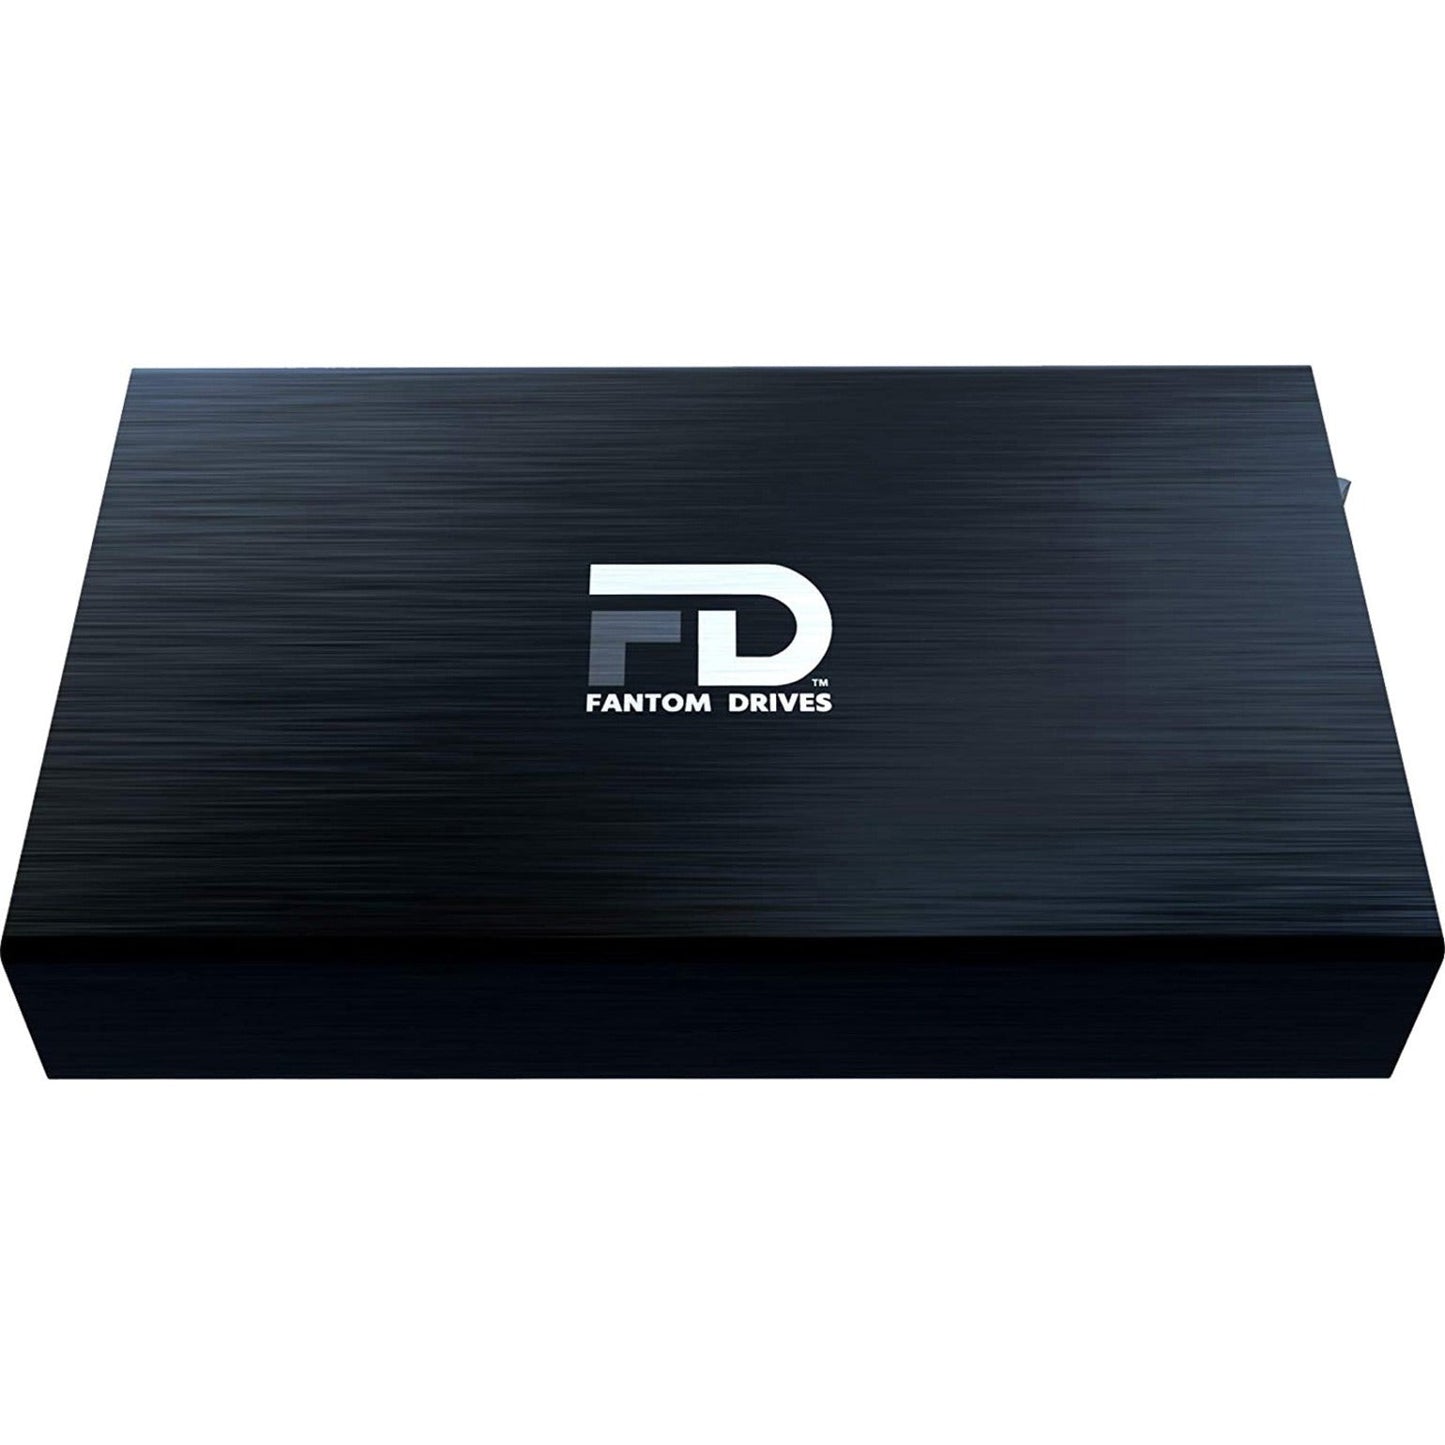 Fantom Drives FD GFORCE 16TB 7200RPM External Hard Drive - USB 3.2 Gen 1 & eSATA - Black - Compatible with Windows & Mac - Made with High Quality Aluminum - 1 Year Warranty. Extra year of warranty when registered with Fantom Drives - (GFP16000EU3)